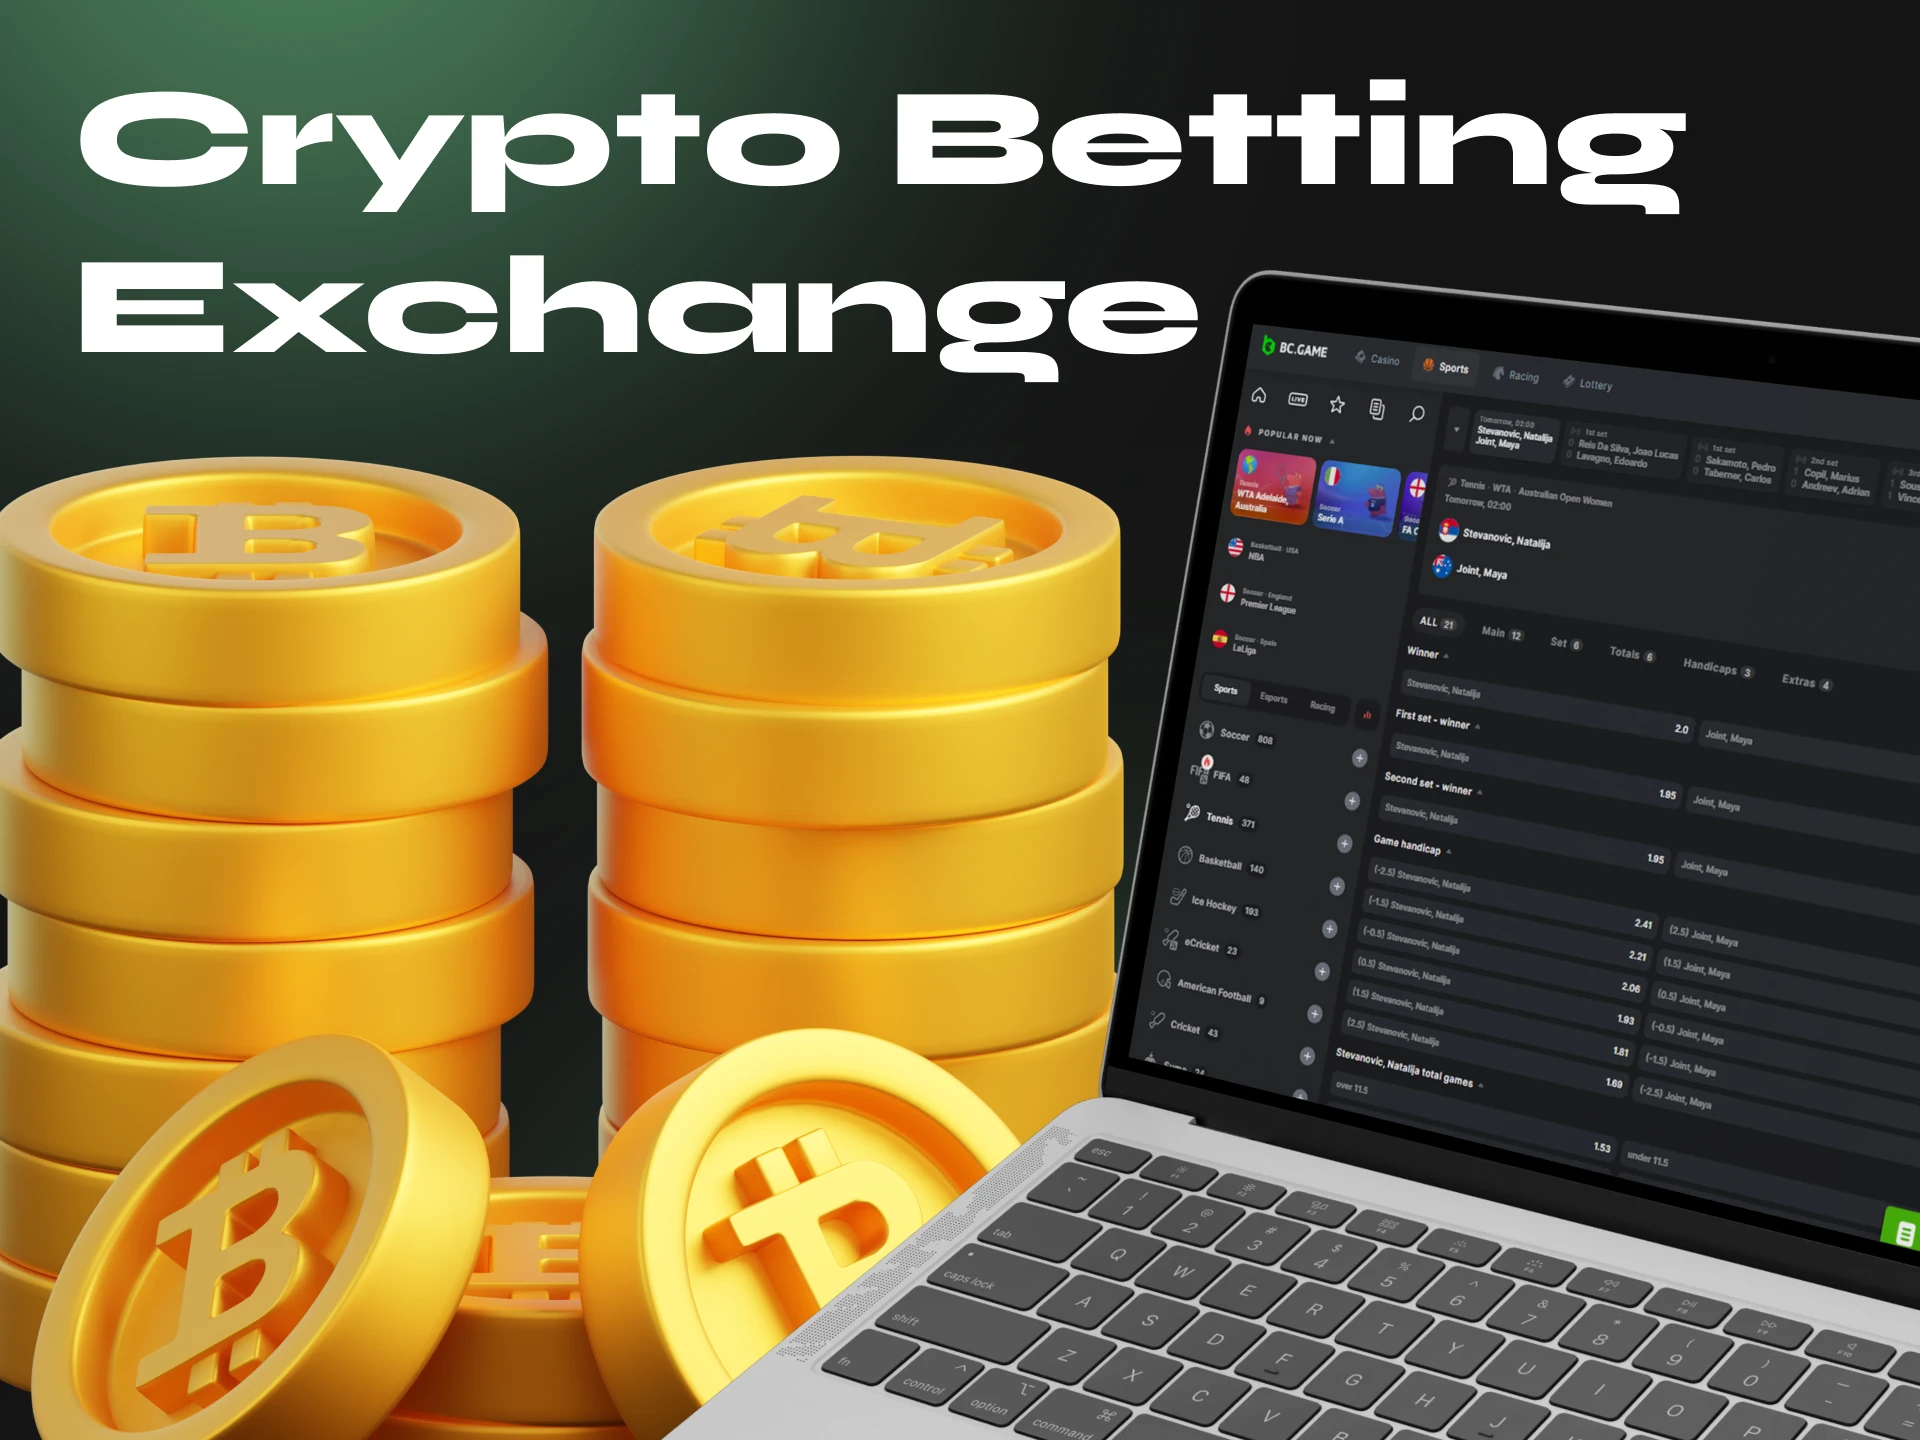 Place direct peer-to-peer bets on cryptocurrency at the casino.